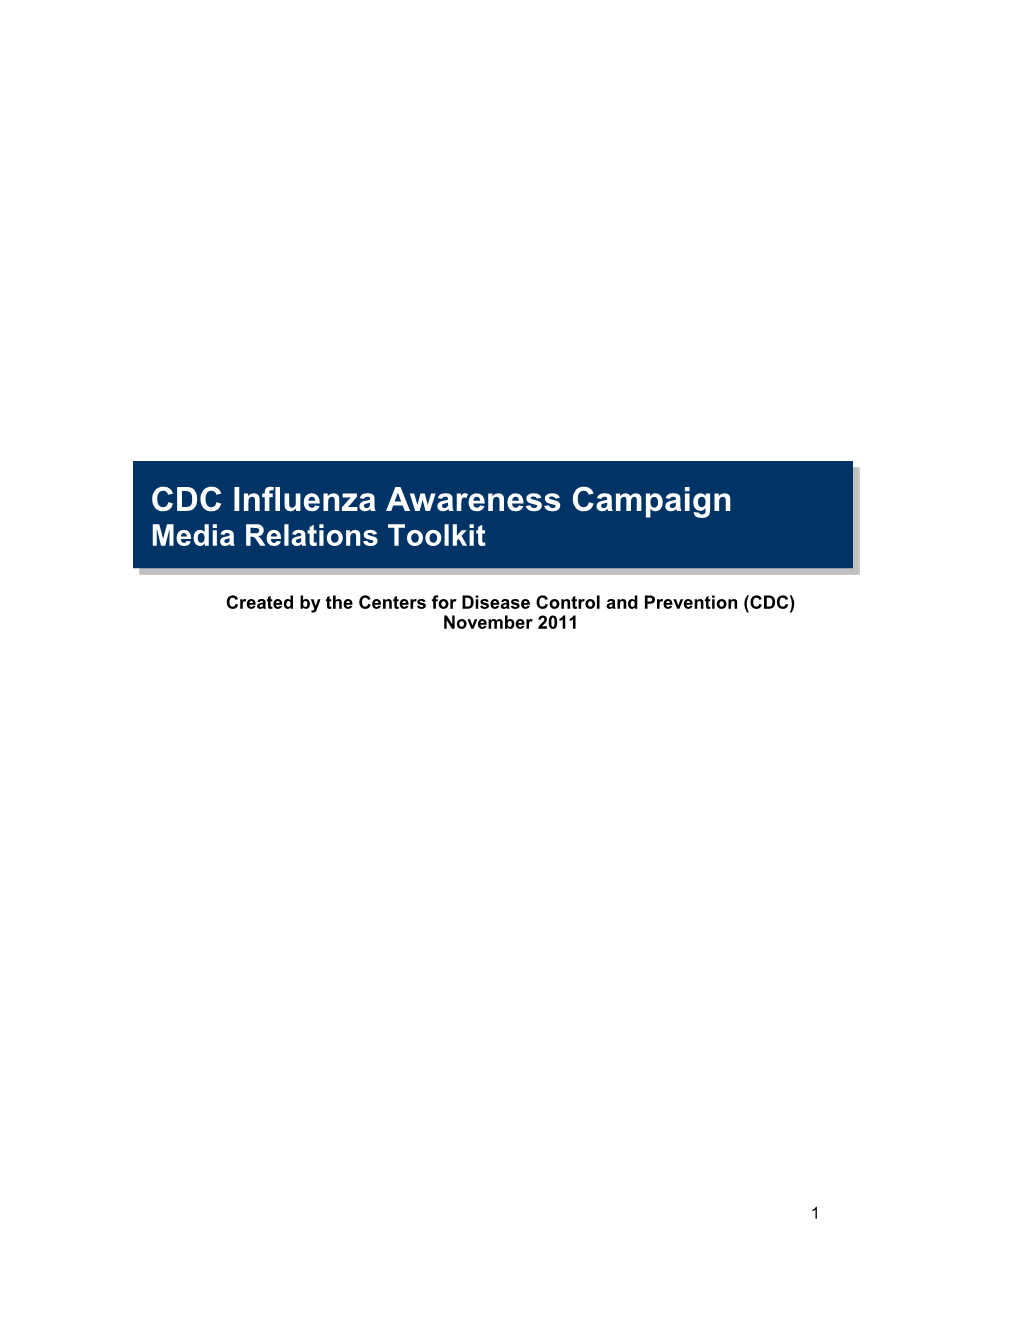 CDC Influenza Awareness Campaign Media Relations Toolkit